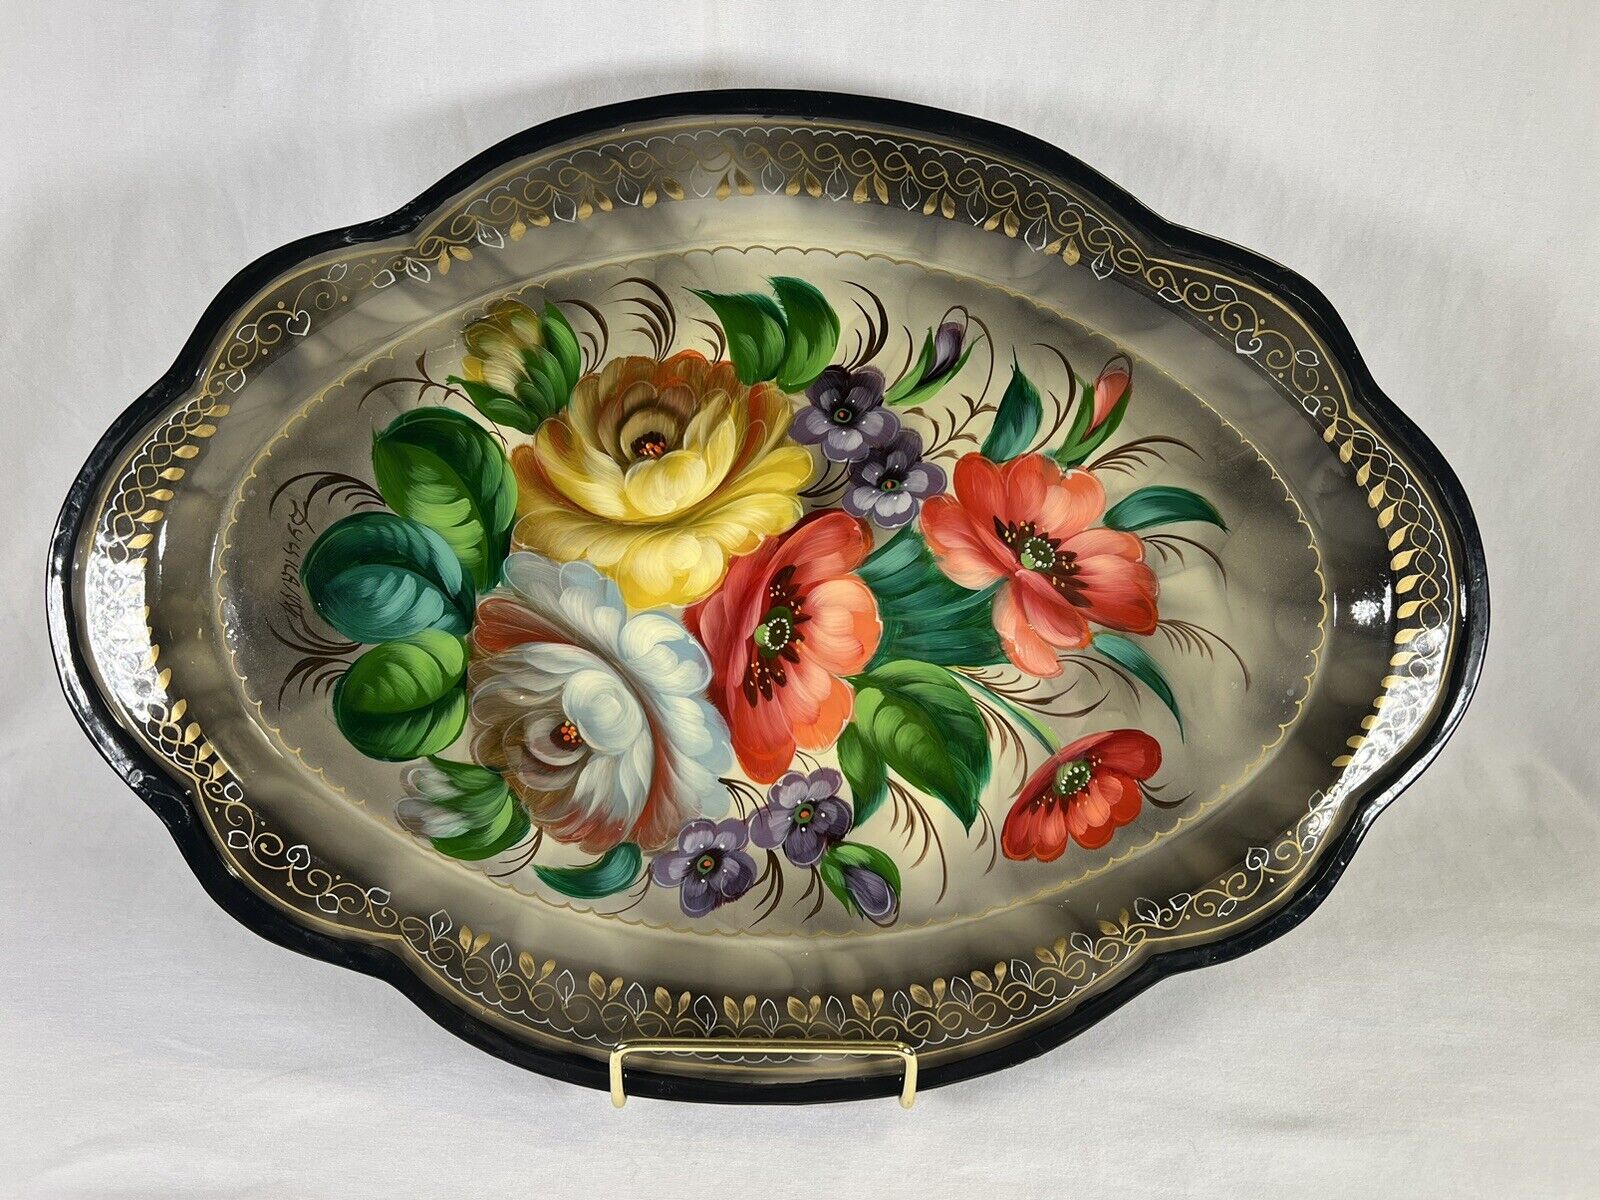 Vintage Signed Tole Painted Metal Tray Black Floral Oval Scalloped Edges